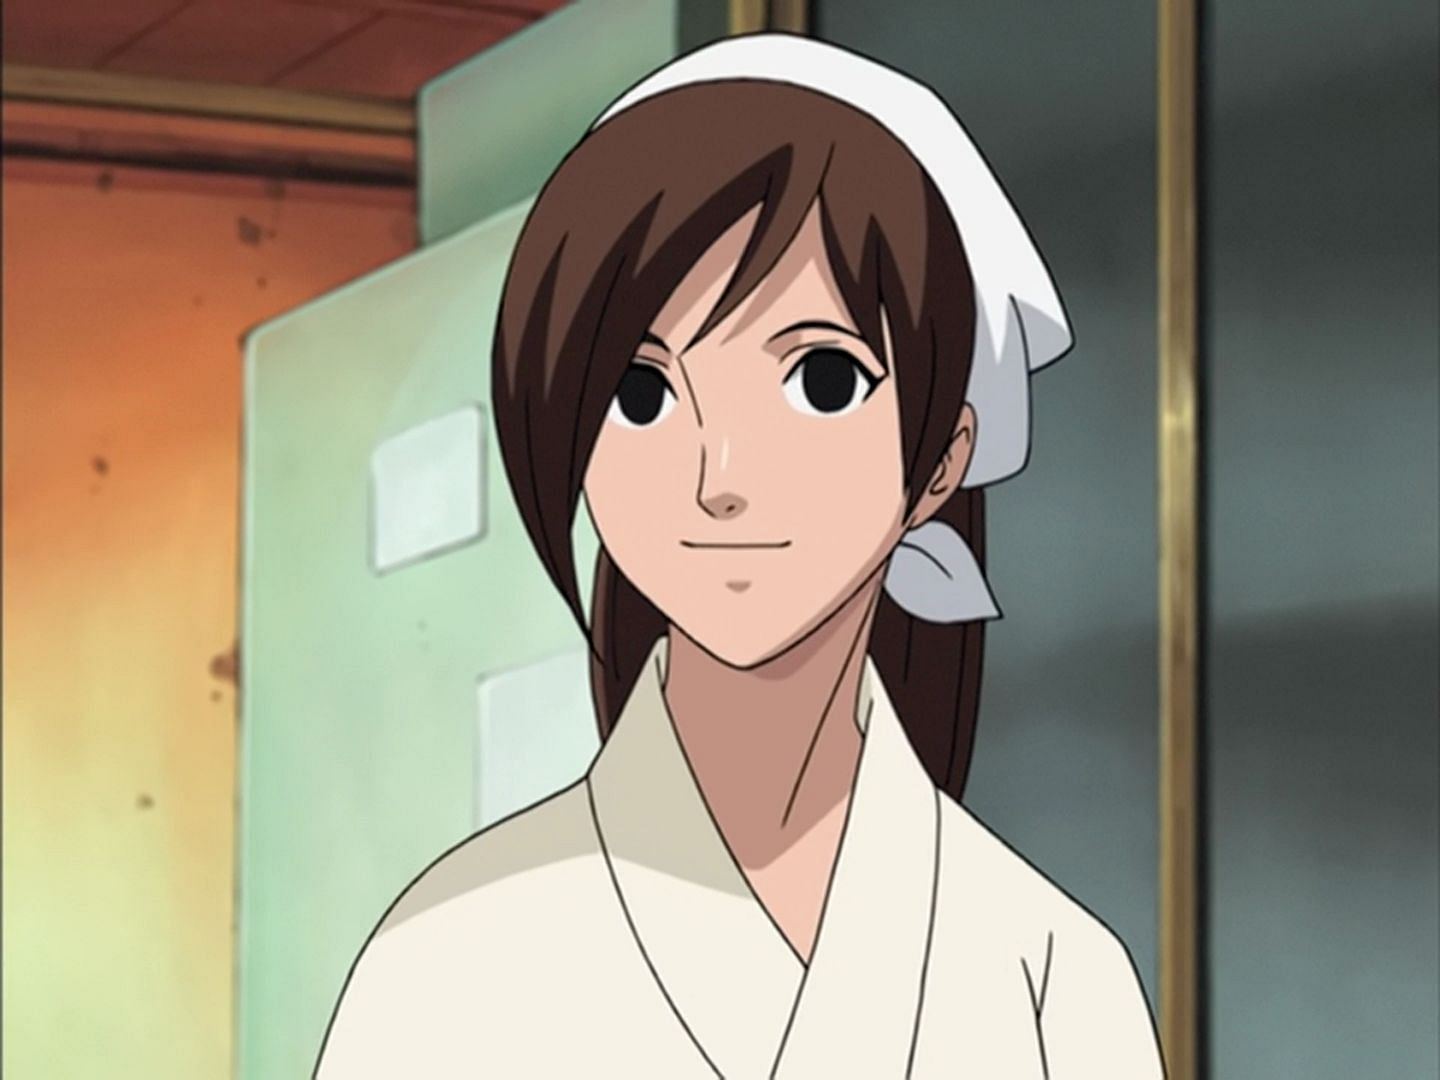 Ayame as she appears in the series (Image via Pierrot)